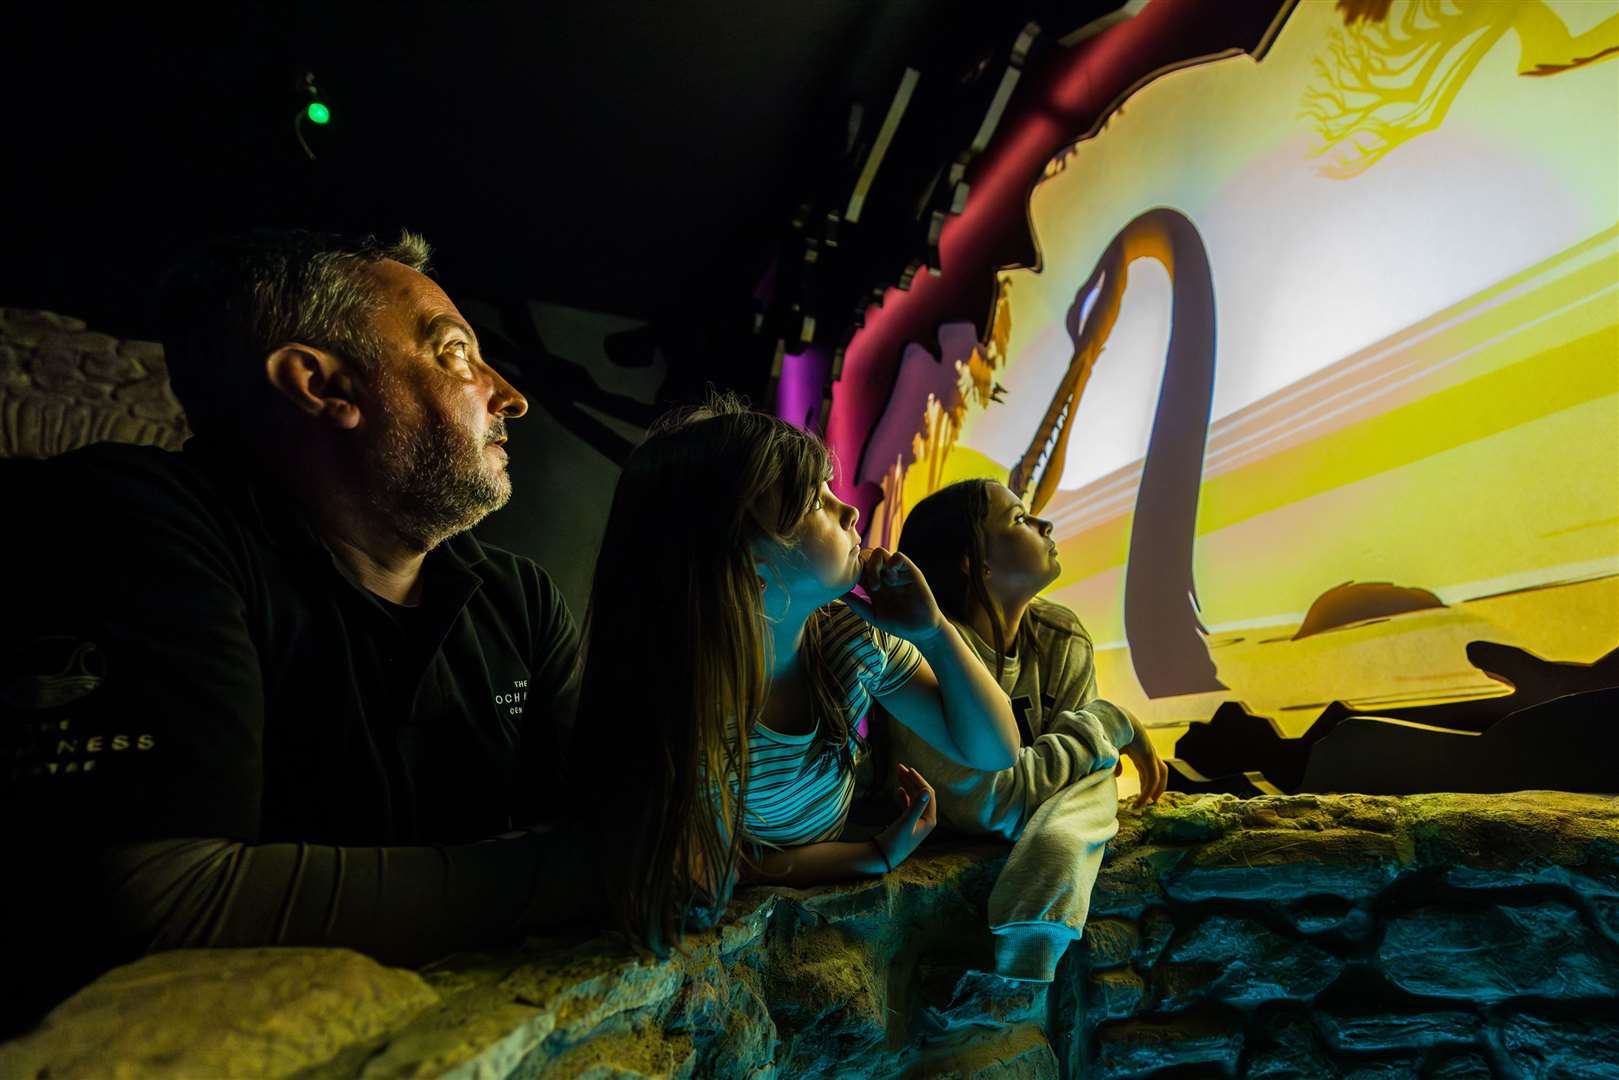 The Loch Ness Monster continues to generate interest from people across the world (Loch Ness Centre/PA)